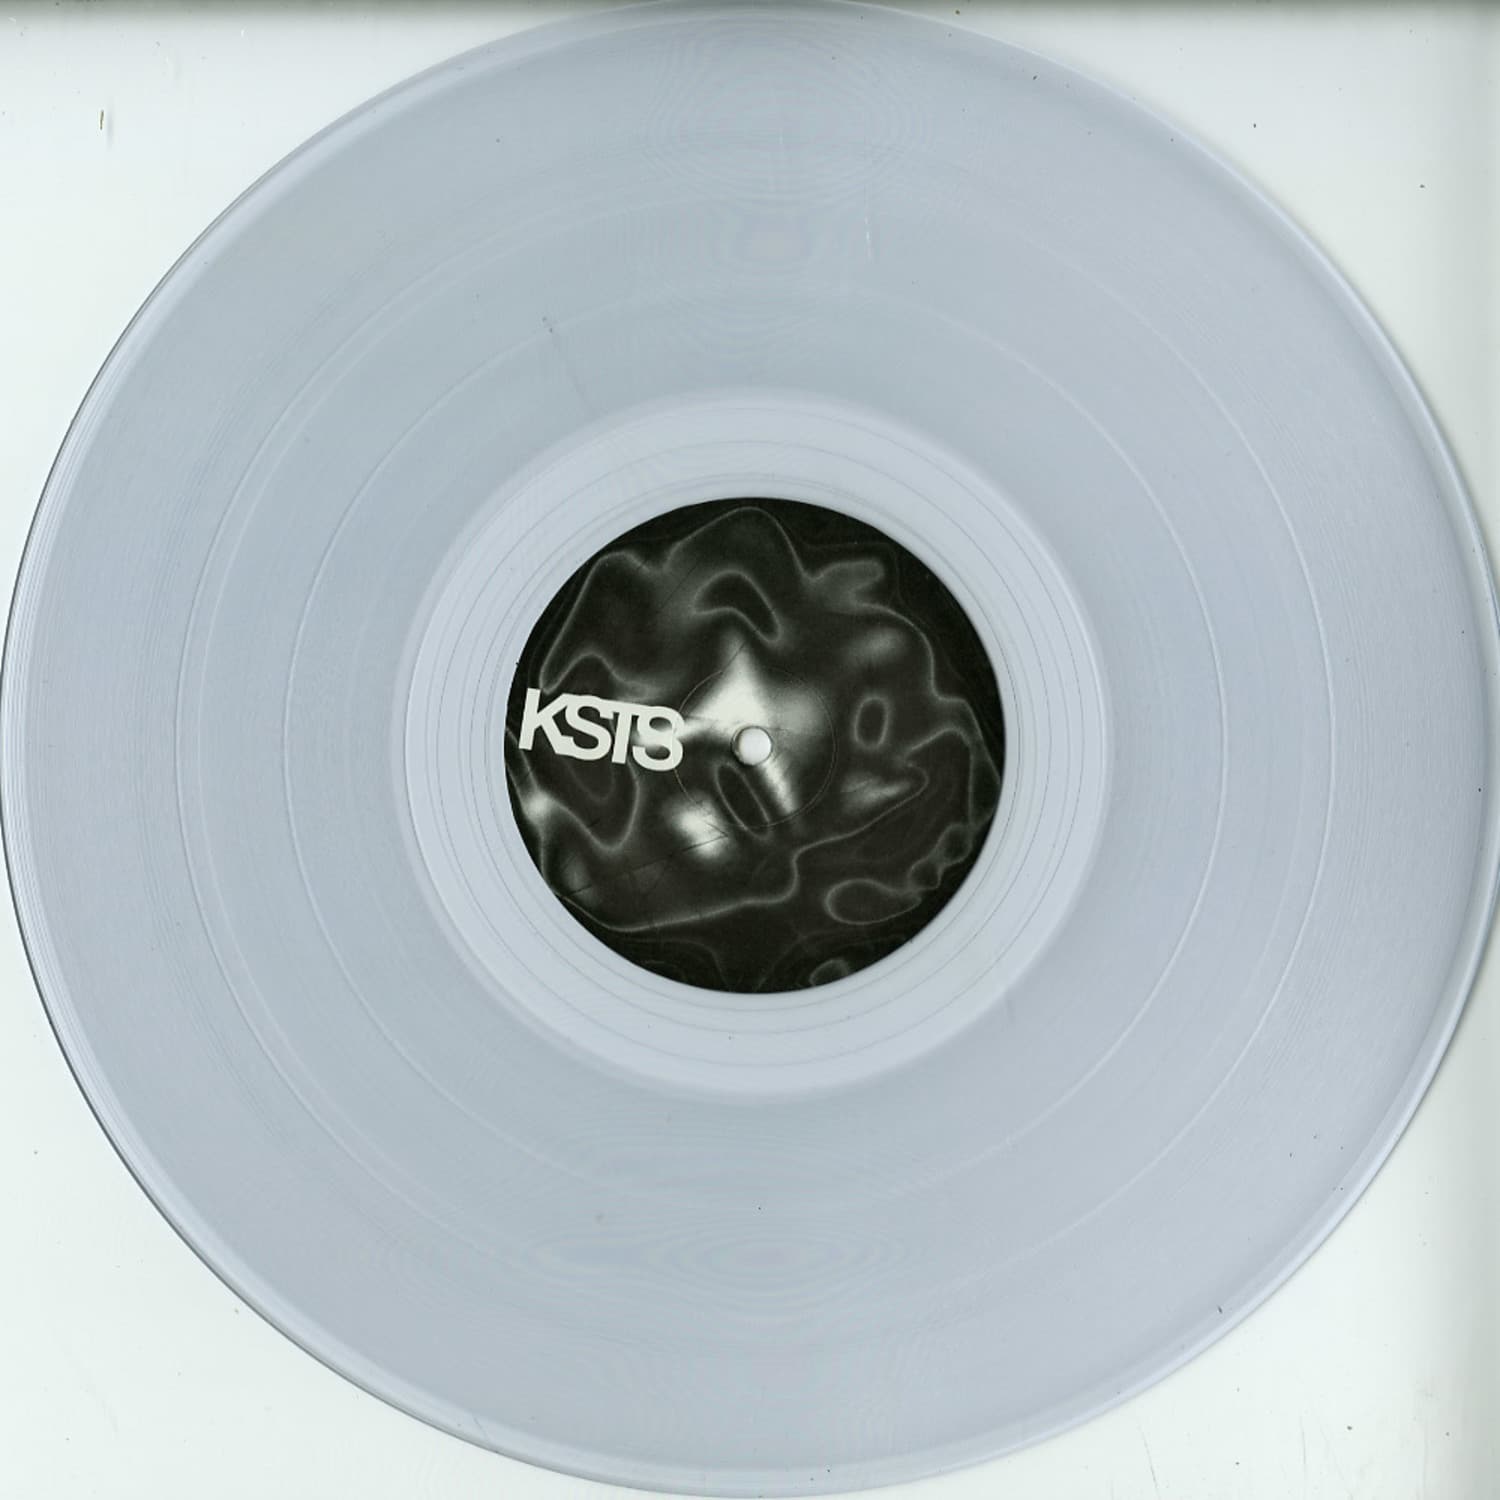 KSTS - SOMETIMES MORE EP 